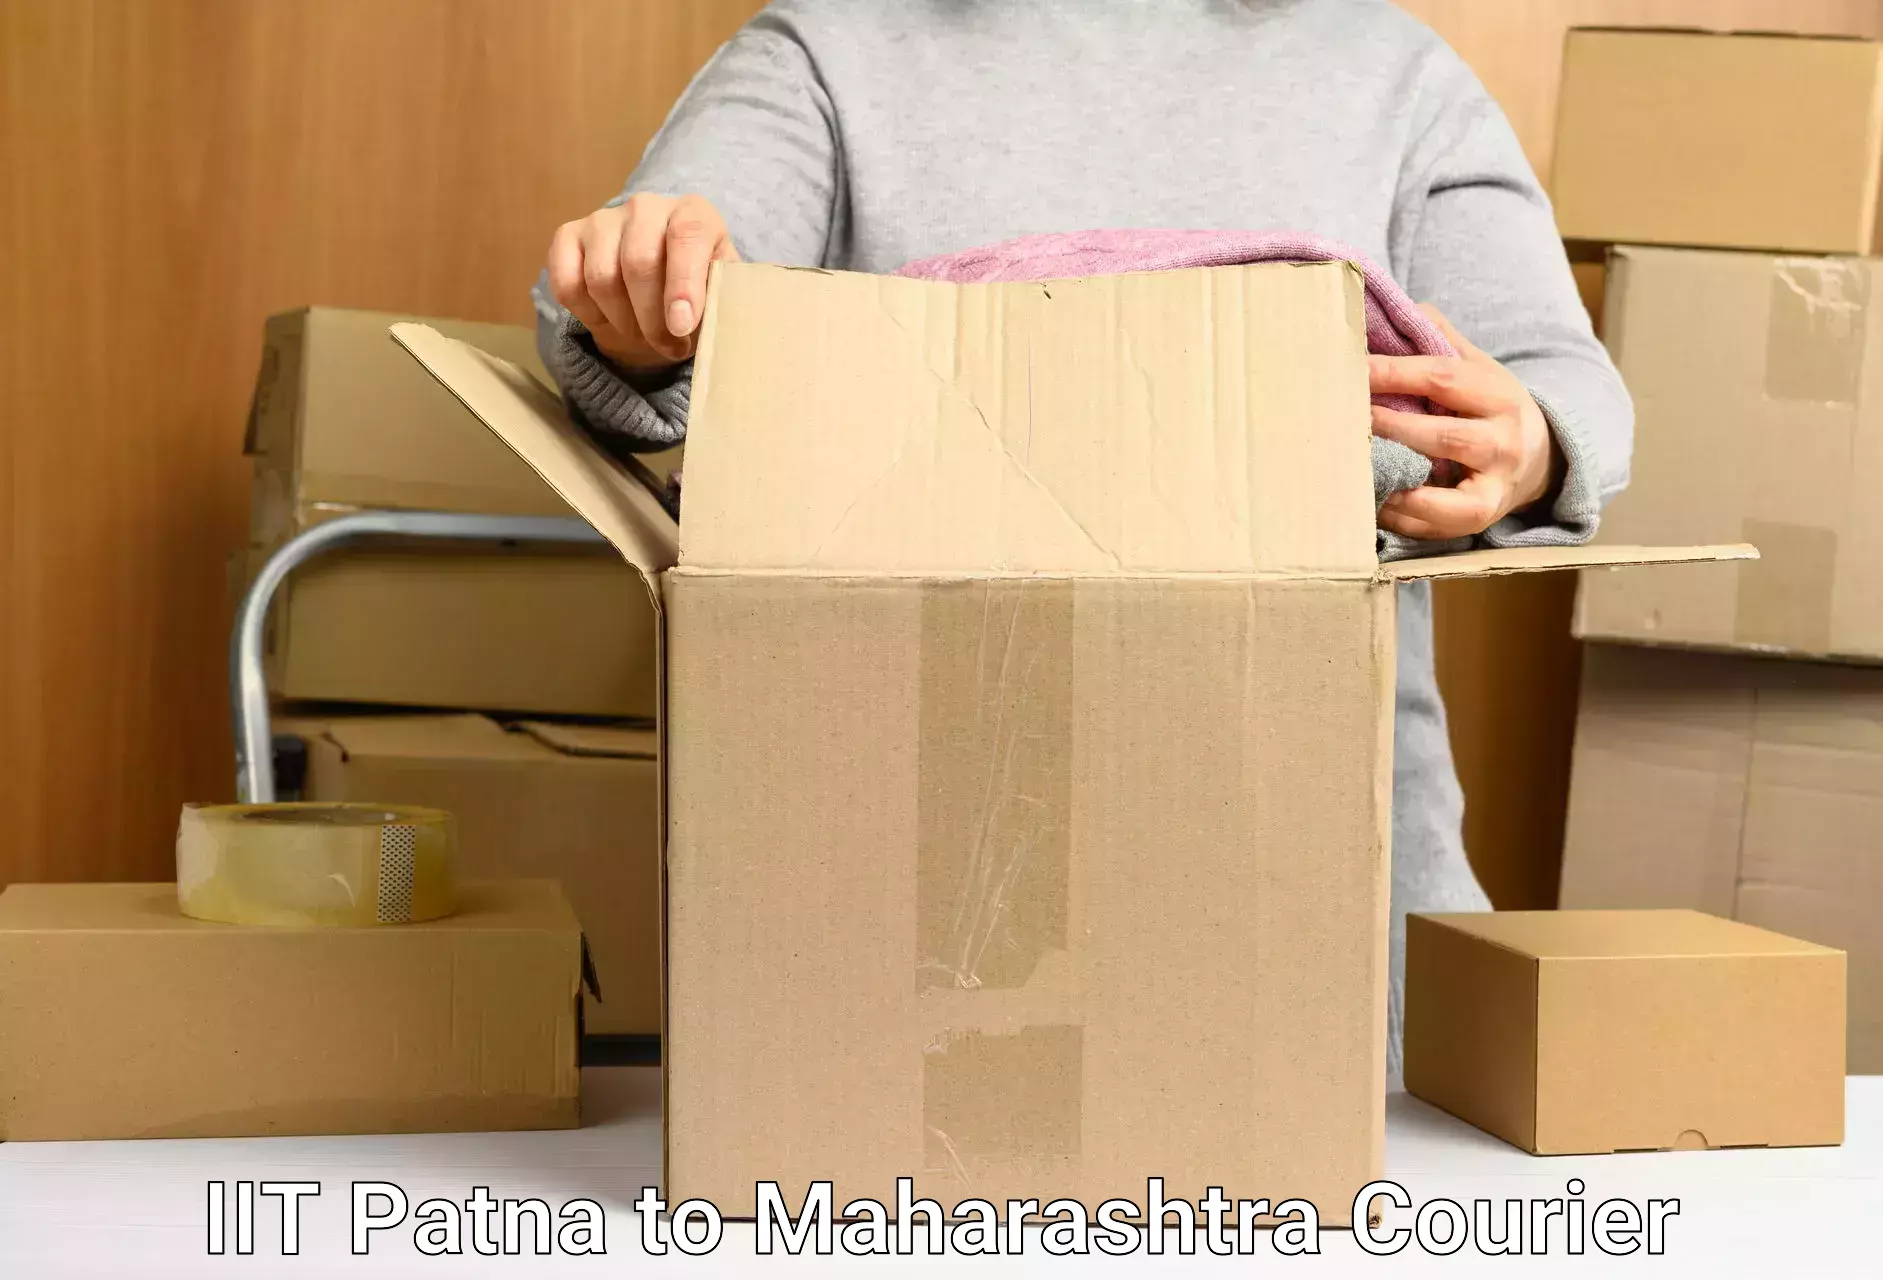 Courier service efficiency IIT Patna to Dharmabad